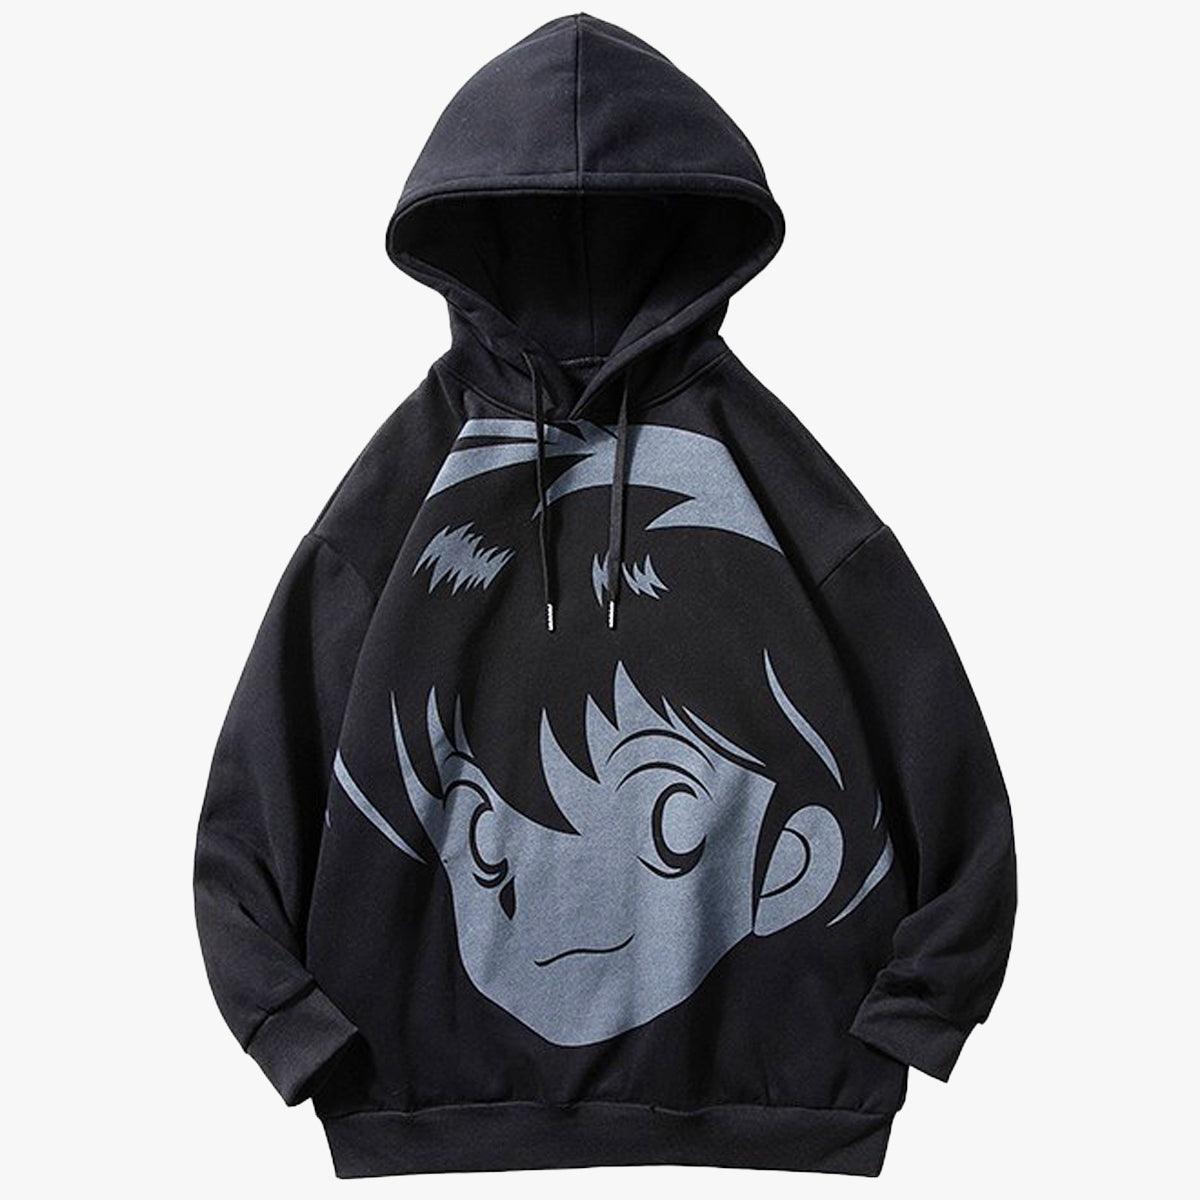 Retro Anime Face Oversized Hoodie - Aesthetic Clothes Shop